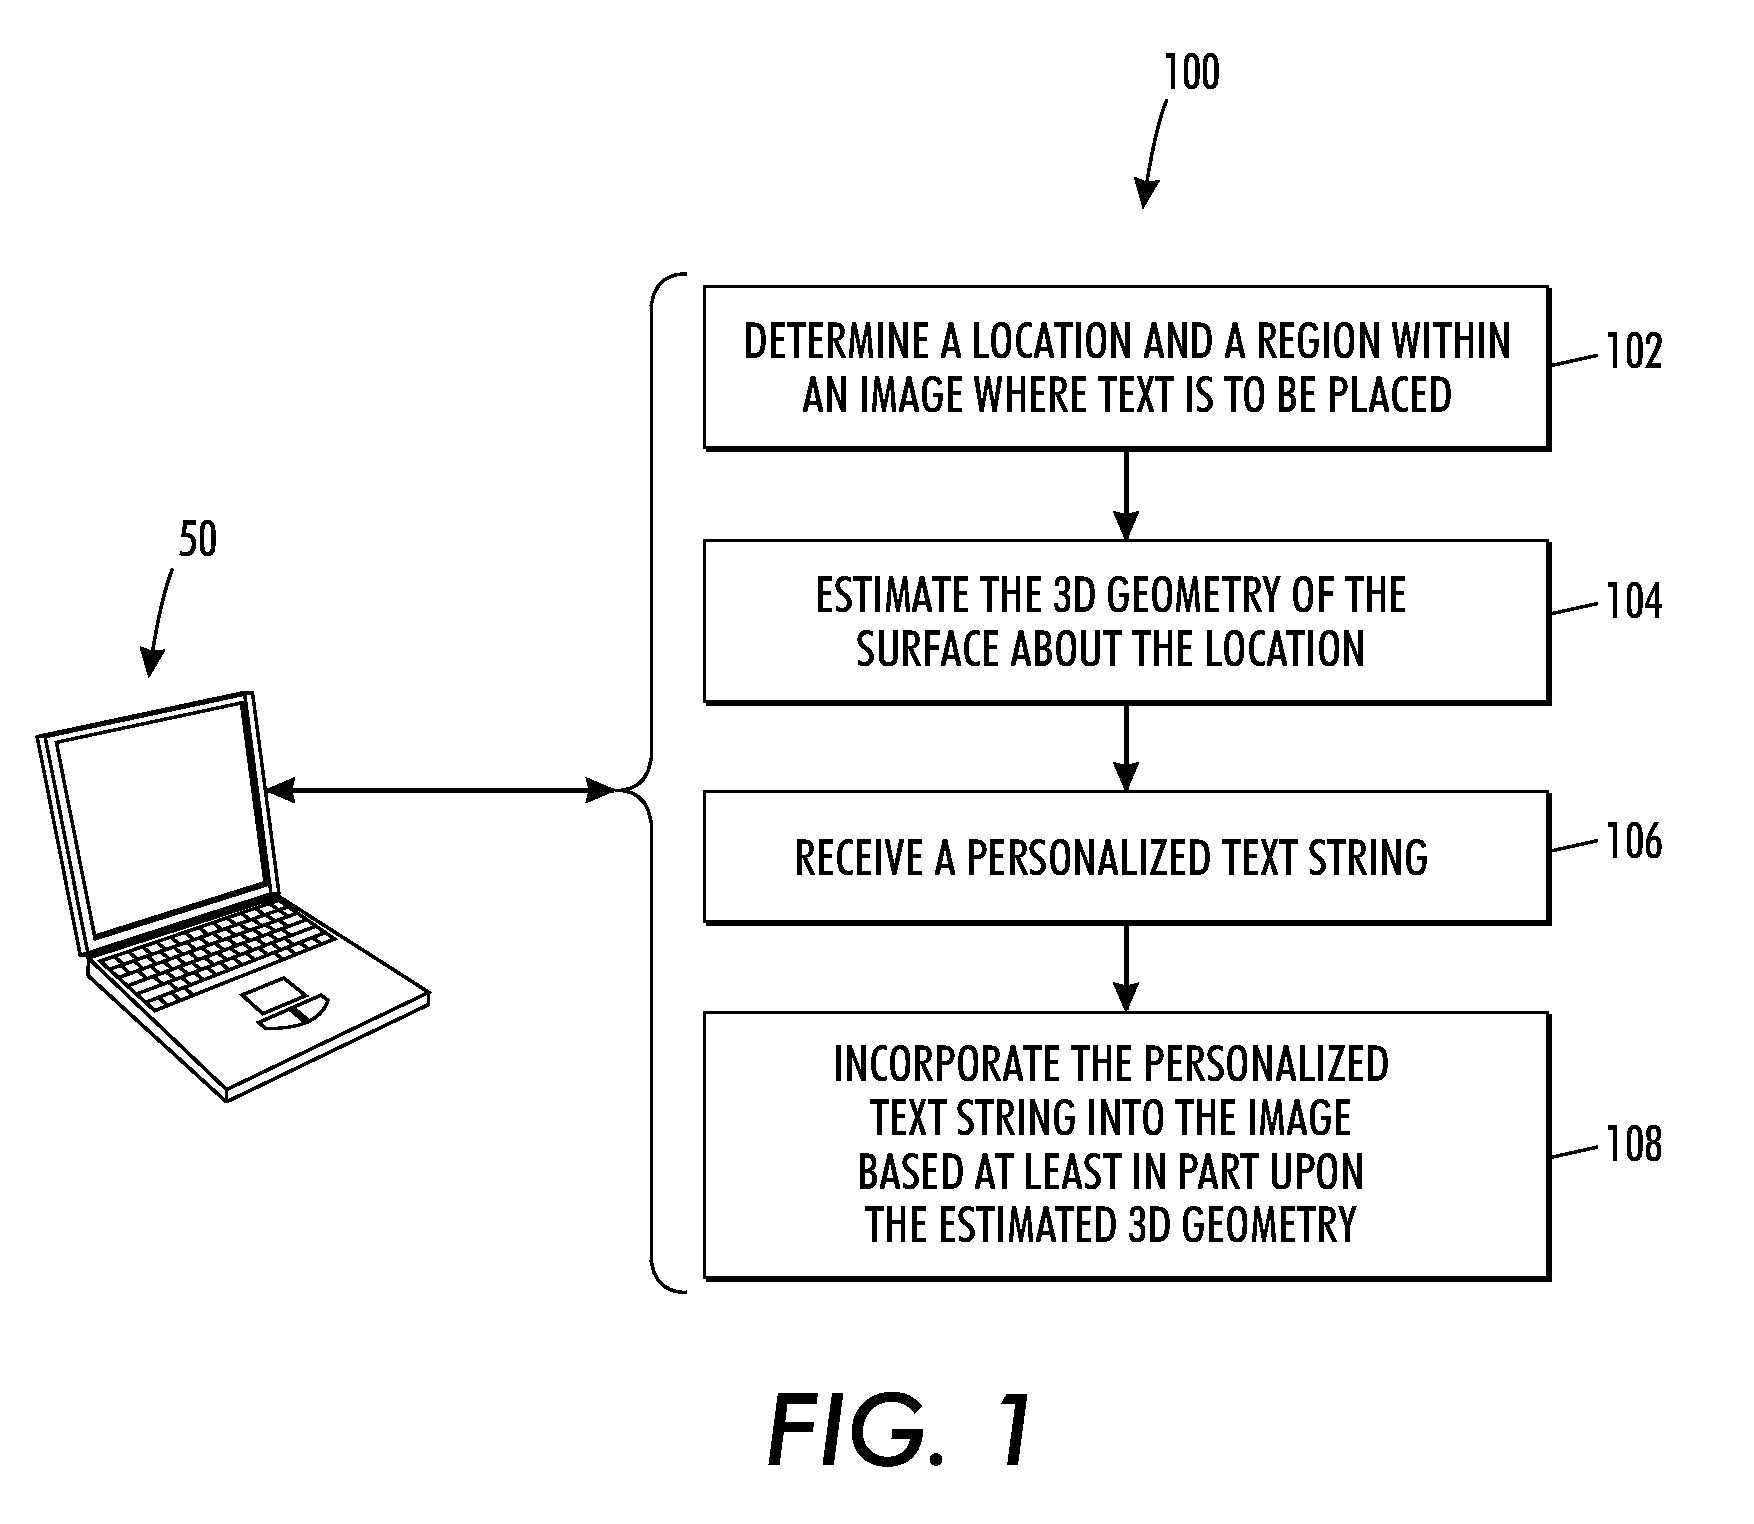 Systems and methods for text-based personalization of images